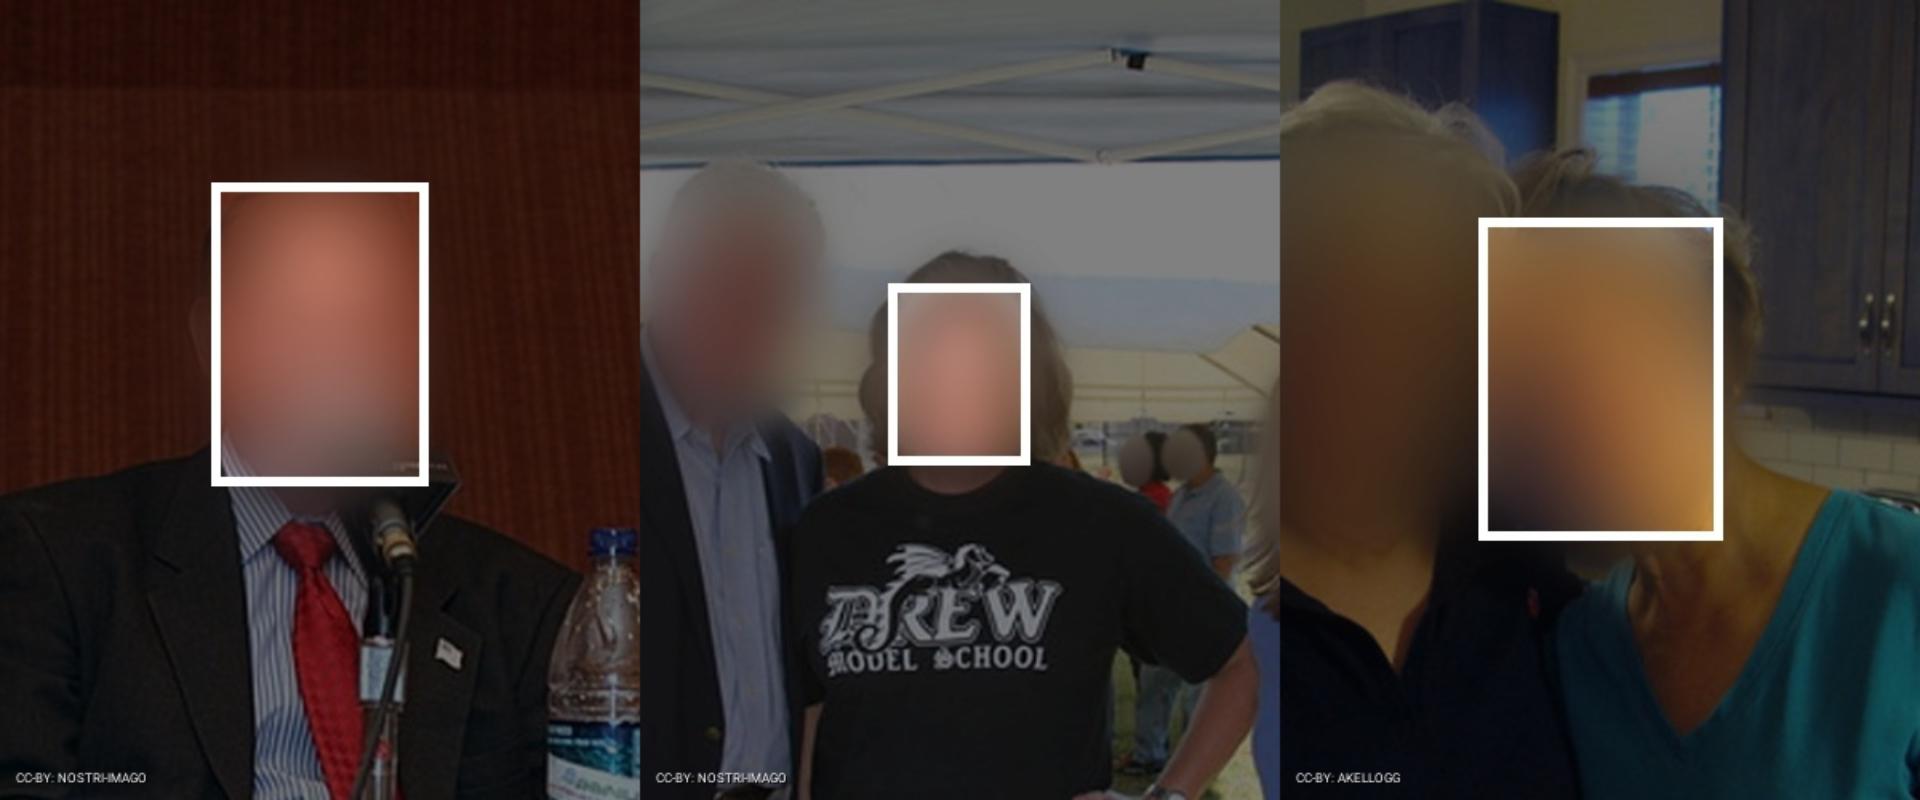 Three of 205 people from the Annotated Faces in The Wild (AFW) face recognition. Faces are blurred to protect privacy. Visualization by Adam Harvey / Exposing.ai licensed under CC-BY-NC with original images licensed and attributed under Creative Commons CC-BY (attribution required, no commercial use).